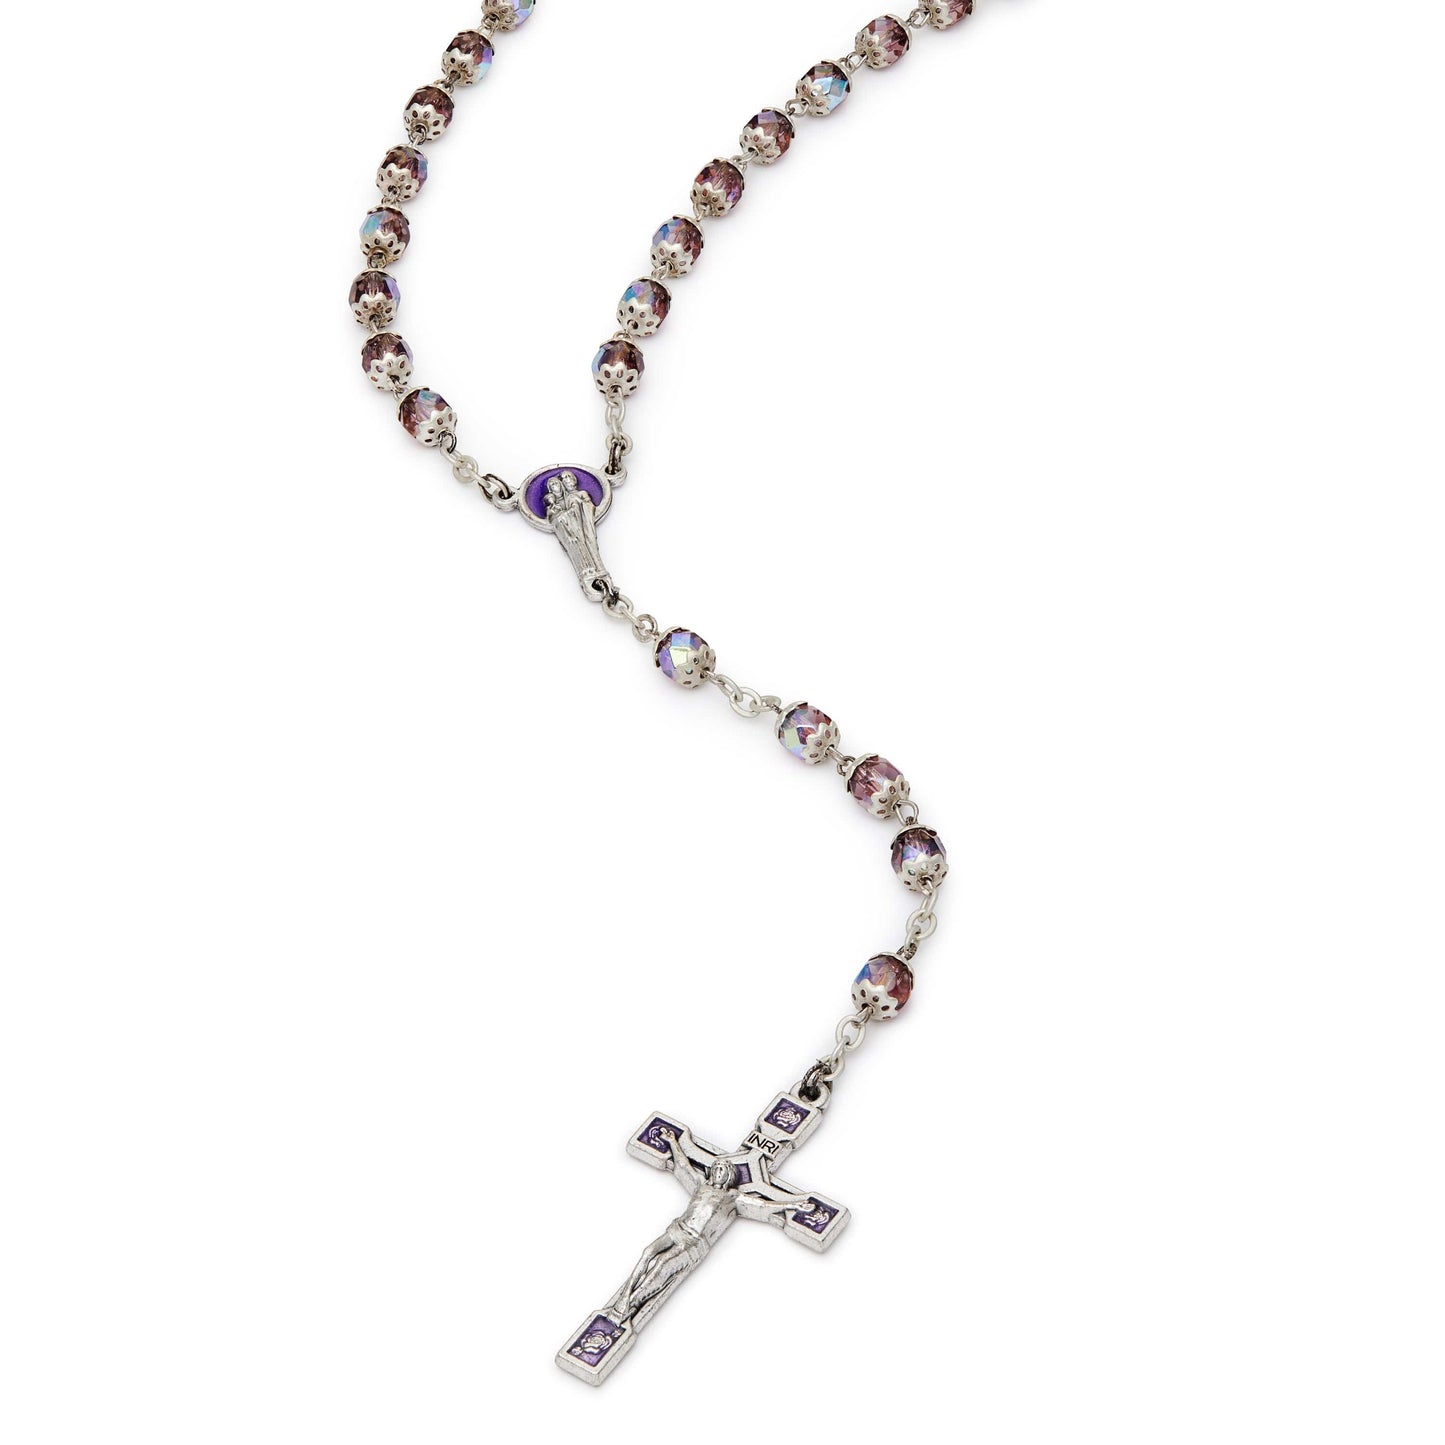 MONDO CATTOLICO Prayer Beads 51.5 cm (20.27 in) / 8 mm (0.31 in) Rosary Beads with enameled Holy Family centerpiece